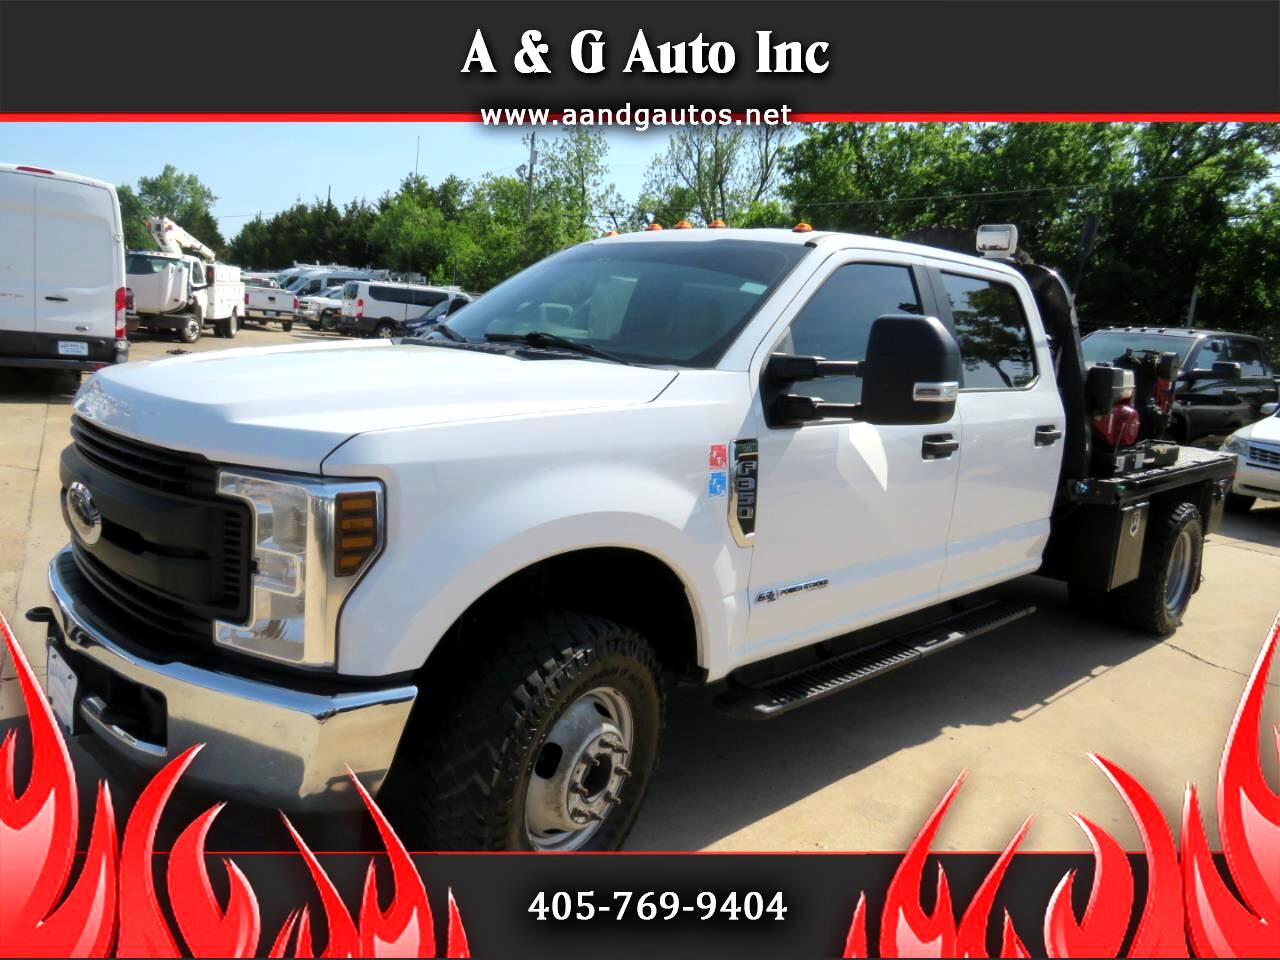 2019 Ford F-350 SD for sale in Oklahoma City OK 73141 by A & G Auto Inc